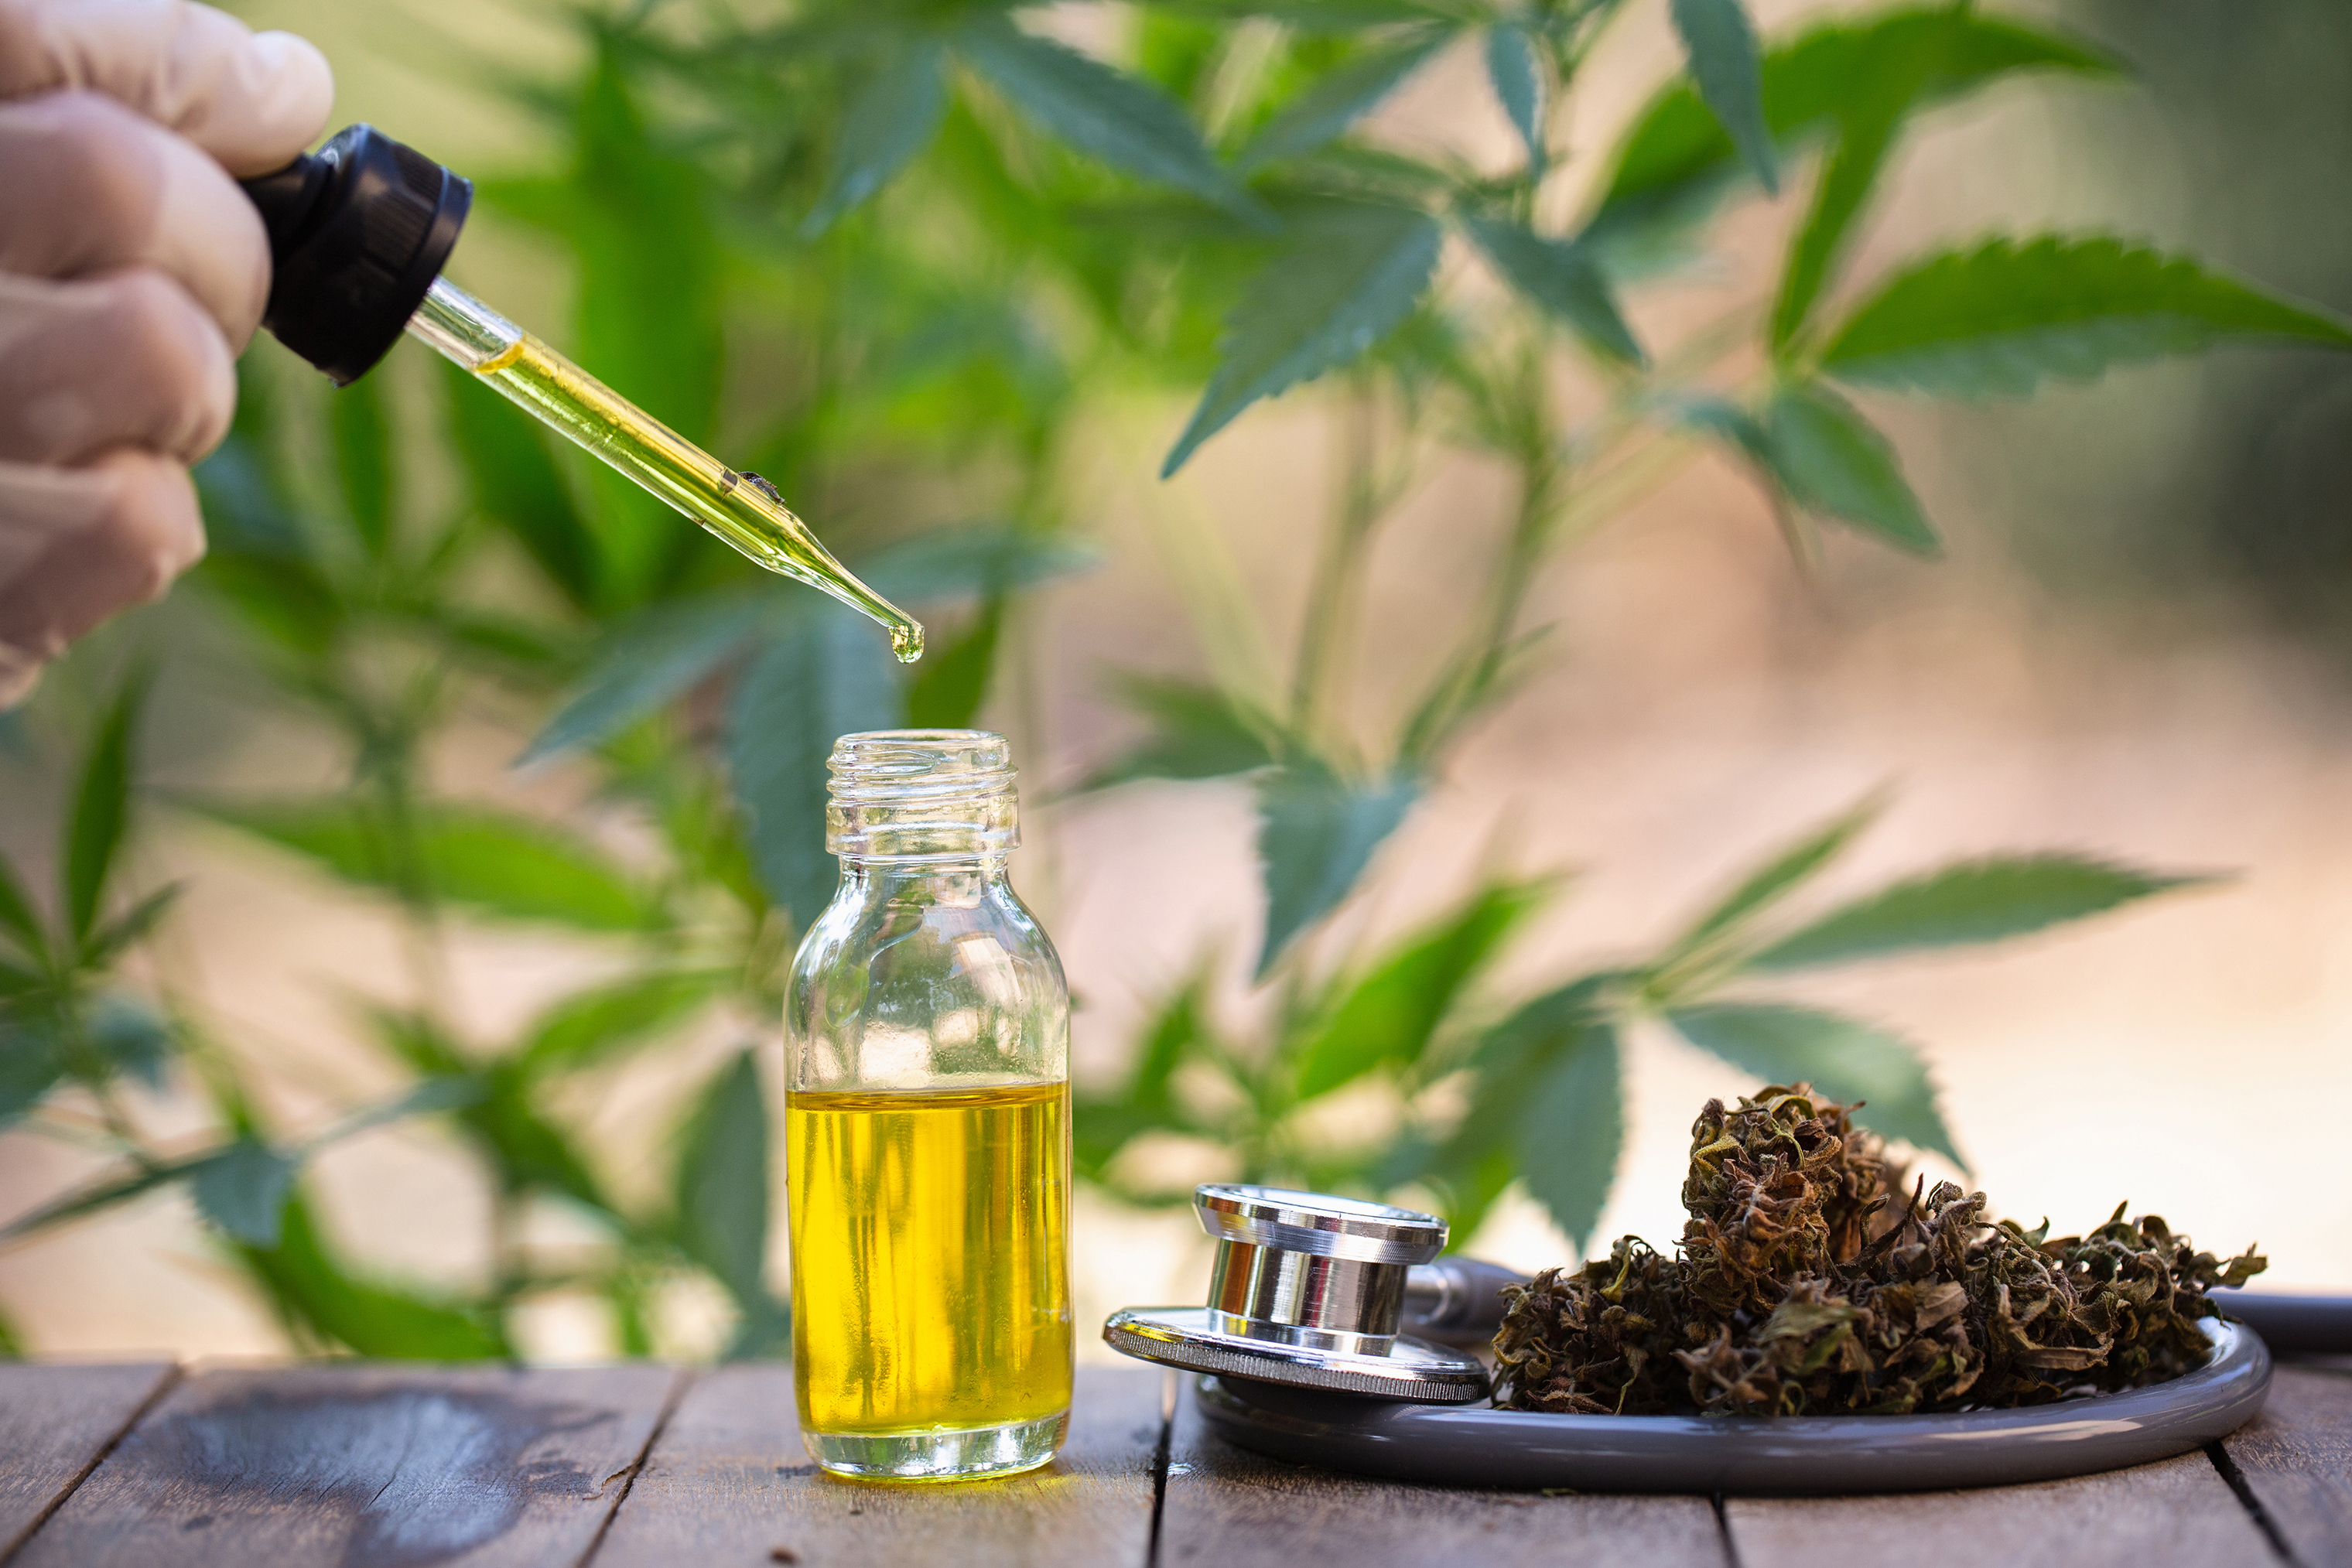 Global Cannabis Indica Oil Market By Industry Growth, Trend and Forecast 2025